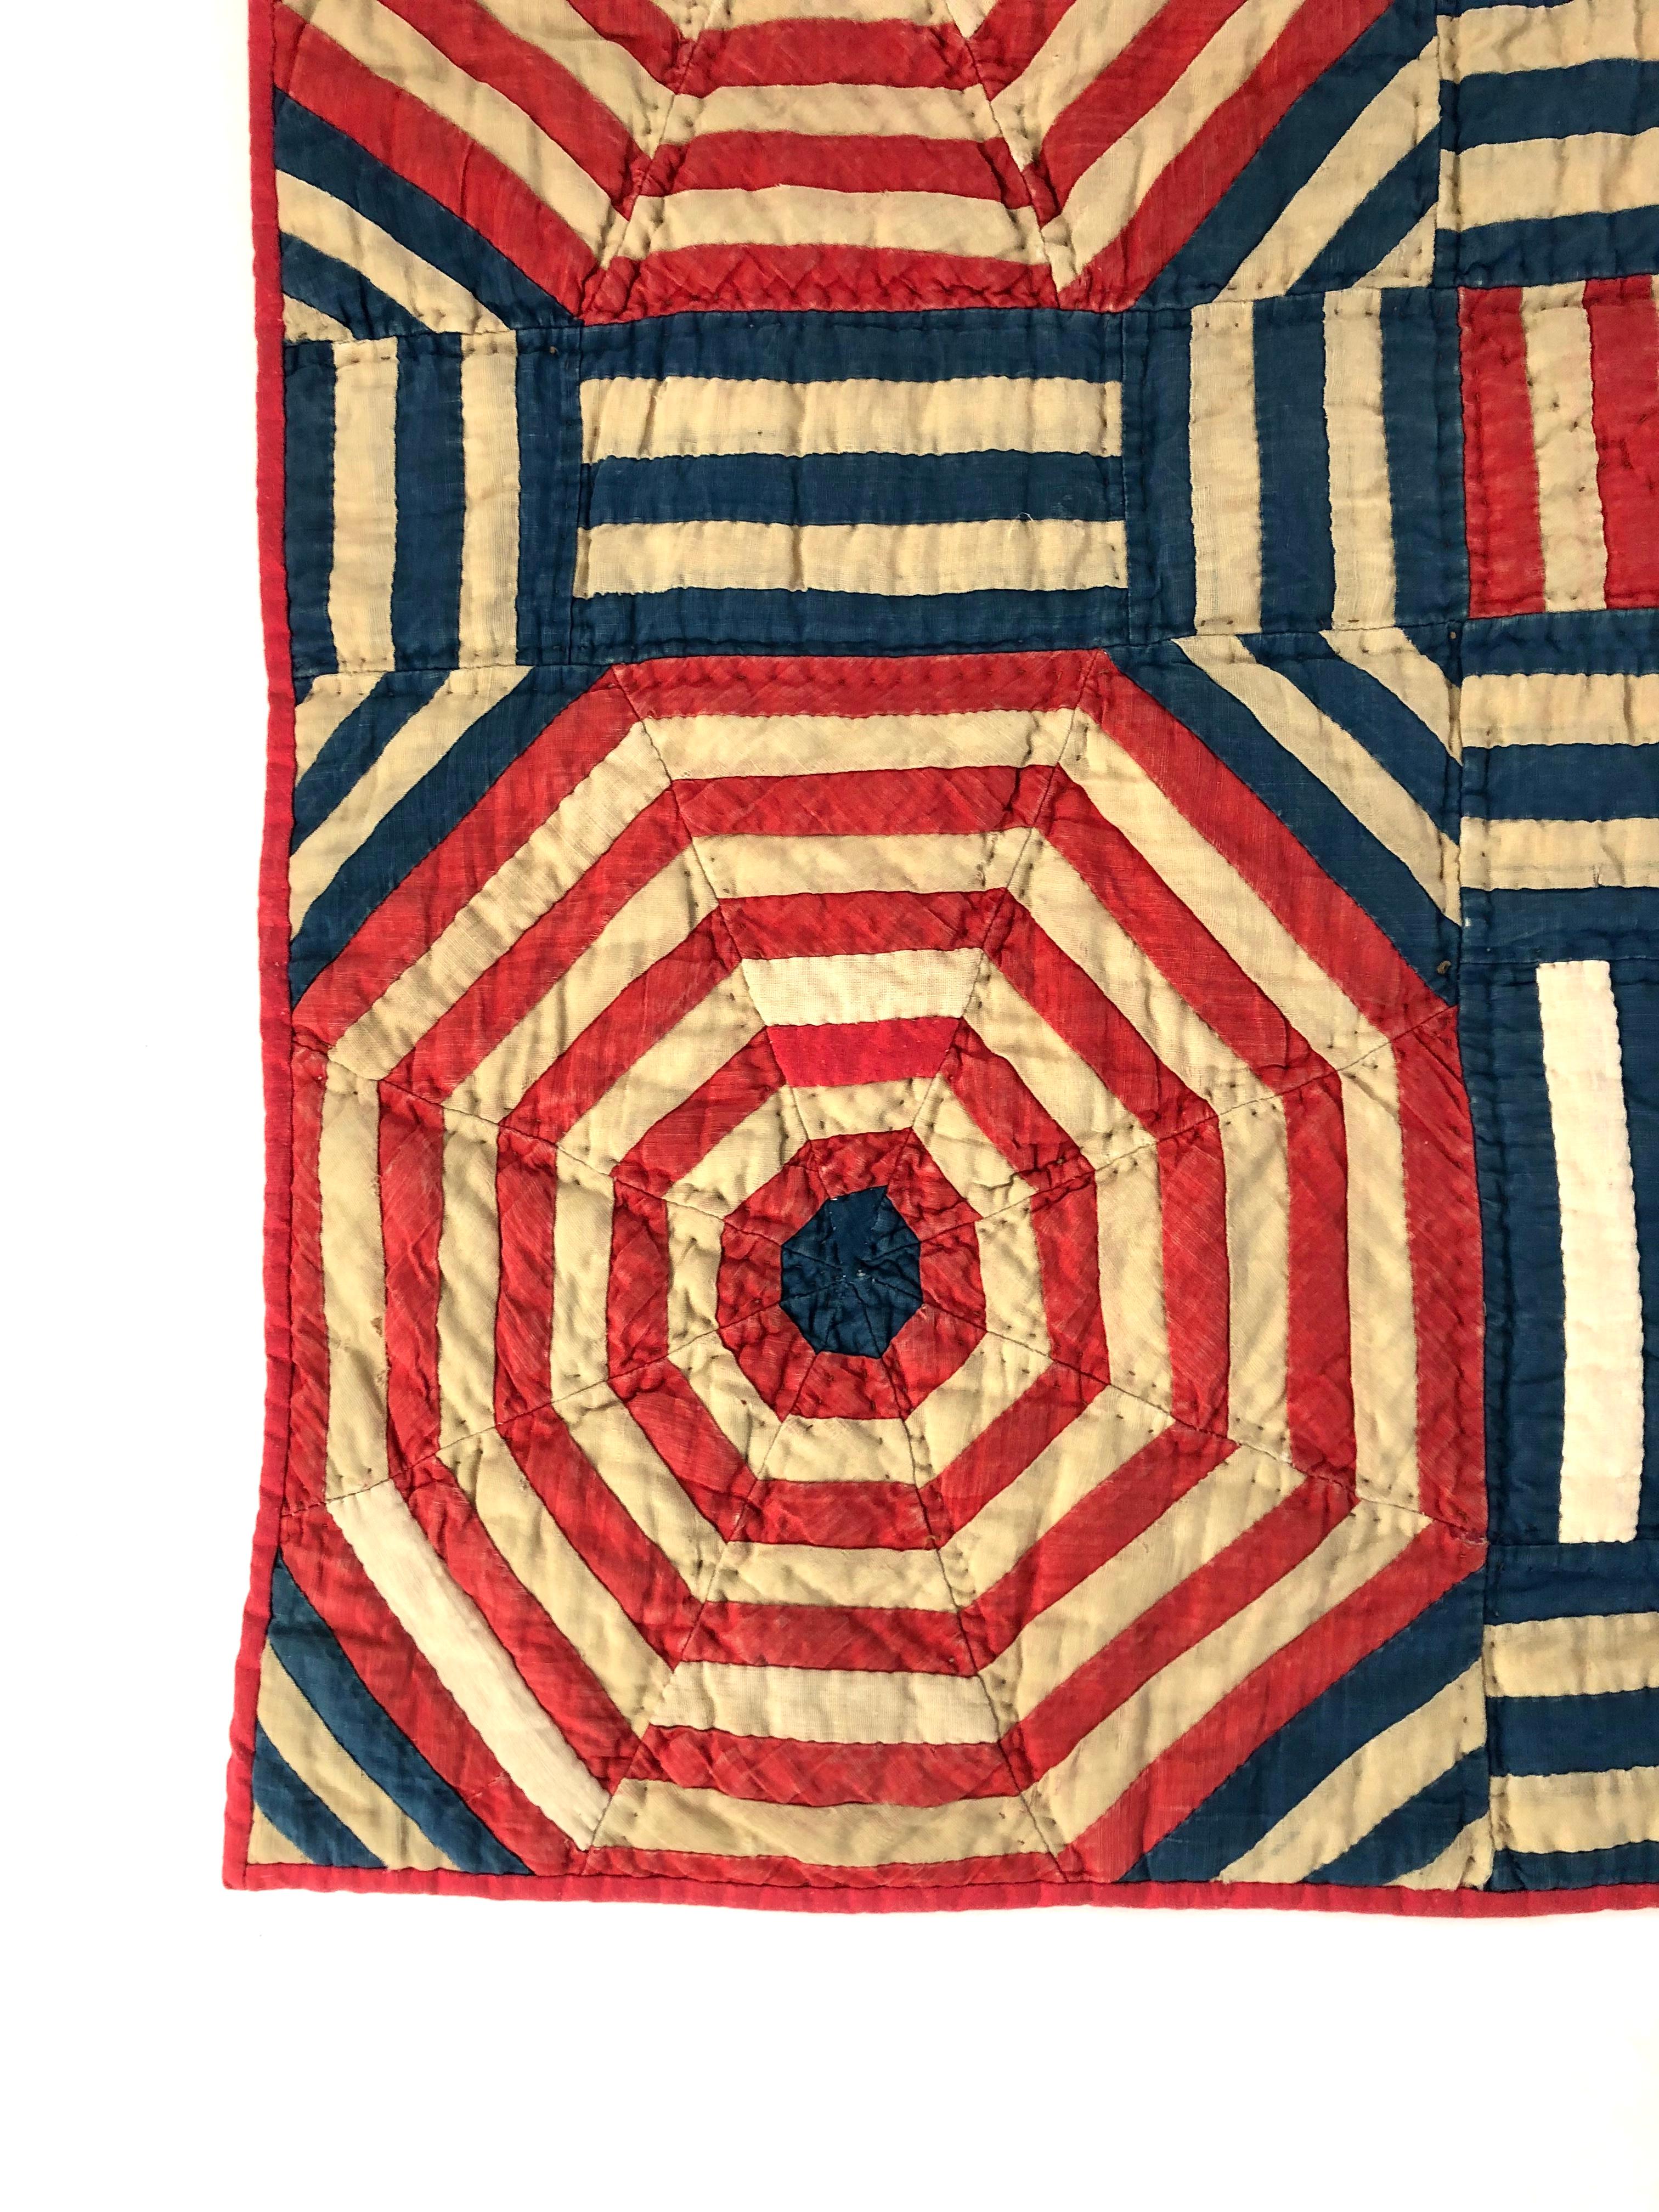 Hand-Crafted American Folk Art Red White and Blue Geometric Crib Quilt Wall Hanging, c. 1876